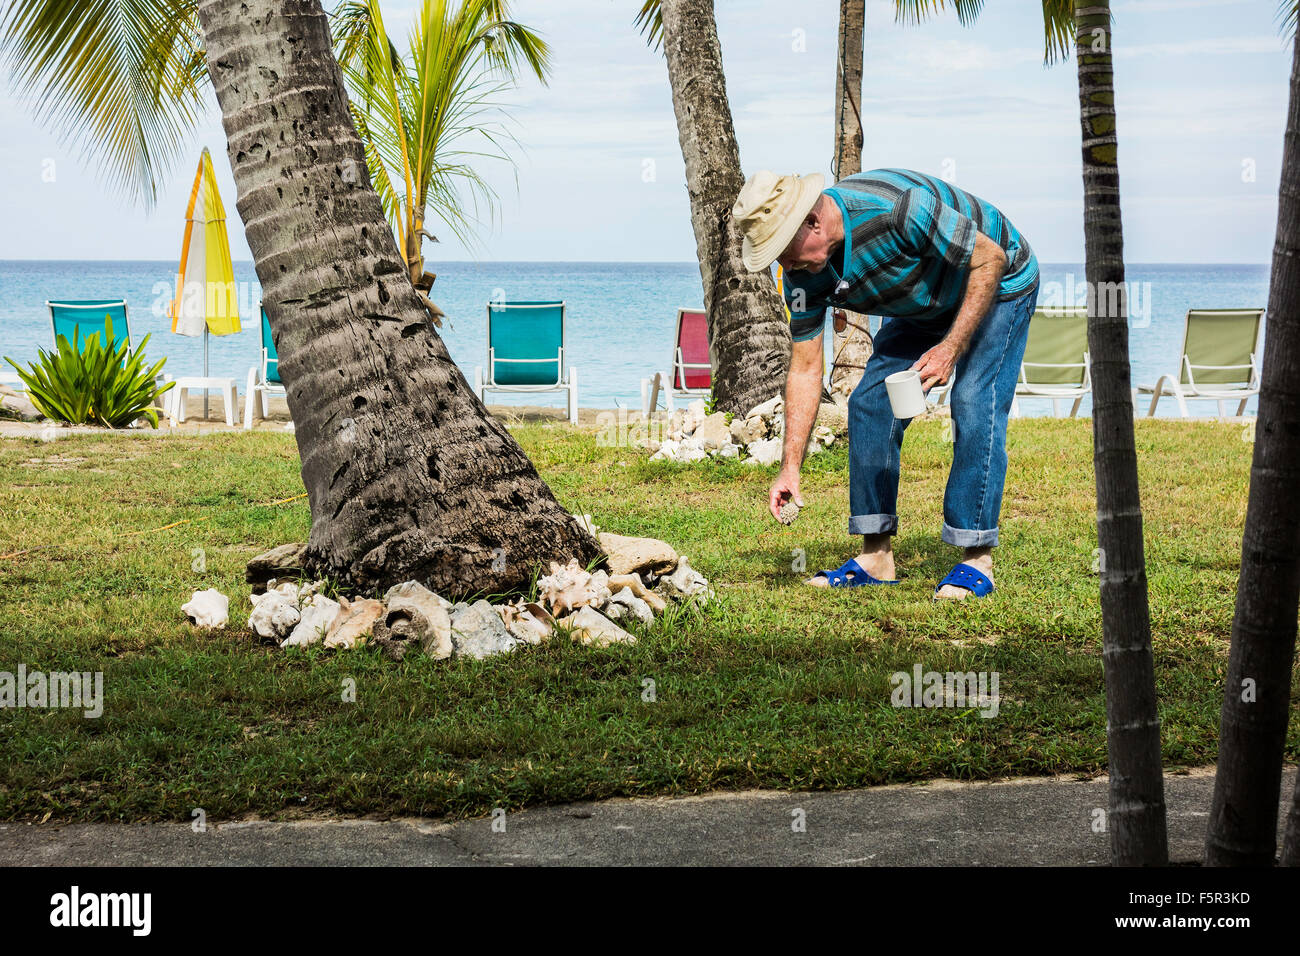 A senior man vacationing at a Caribbean resort inspects shells arranged around a palm tree in St. Croix,U.S. Virgin Islands. Stock Photo